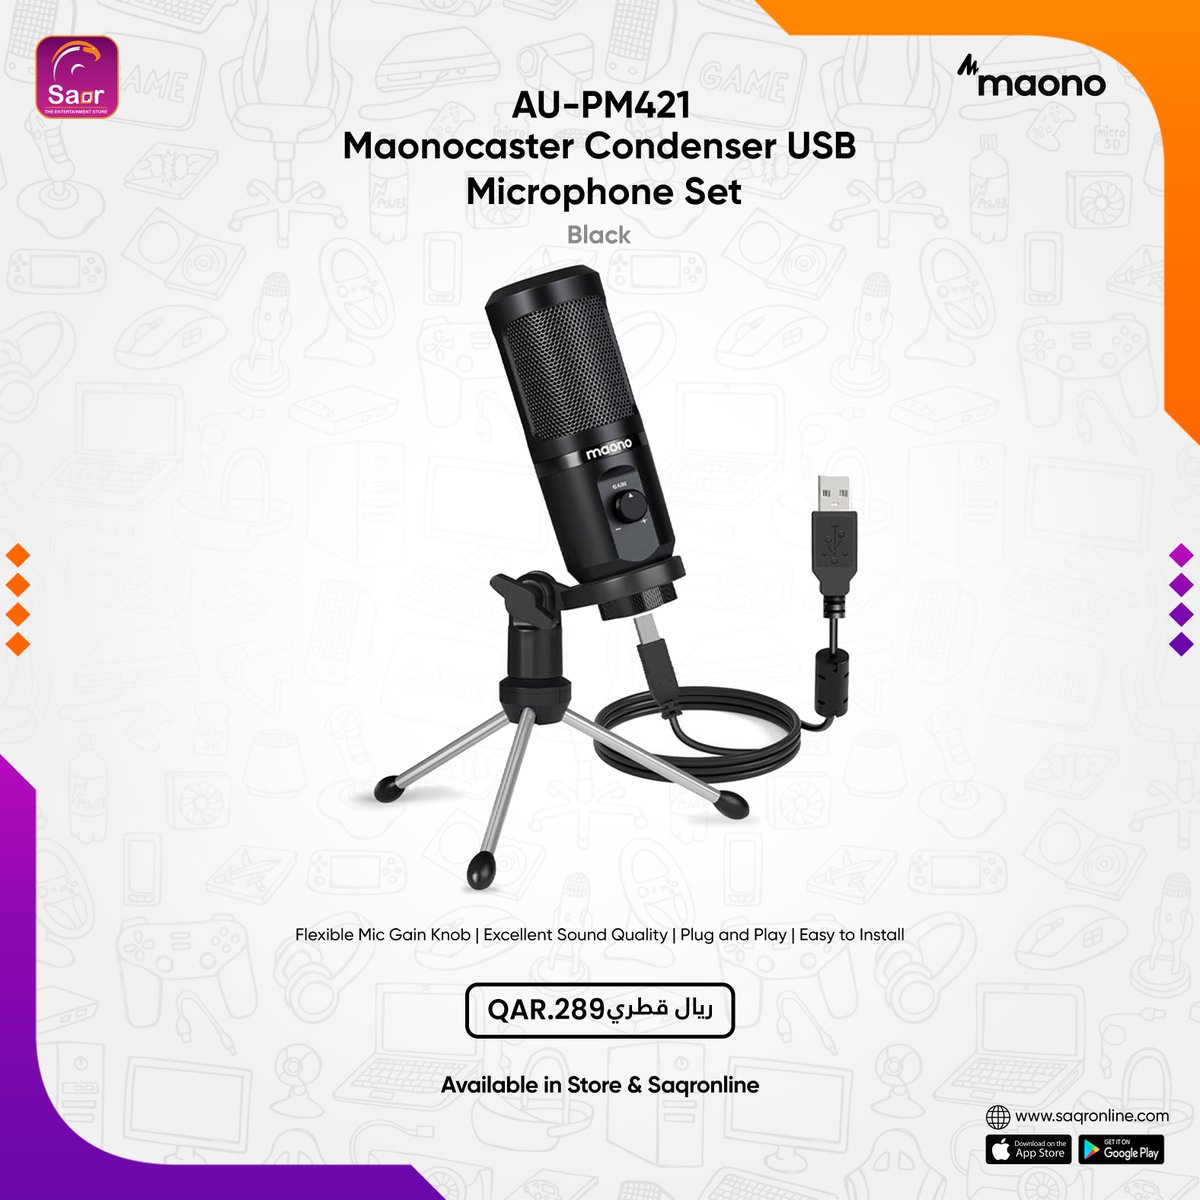 Let us mix your favorite beats and sounds into an everlasting masterpiece!
#maono #portablemicrophone #microphone #microphones #soundmixer #audio #audiomixer #streamingmicrophone #soundaccessories #musicaccessories